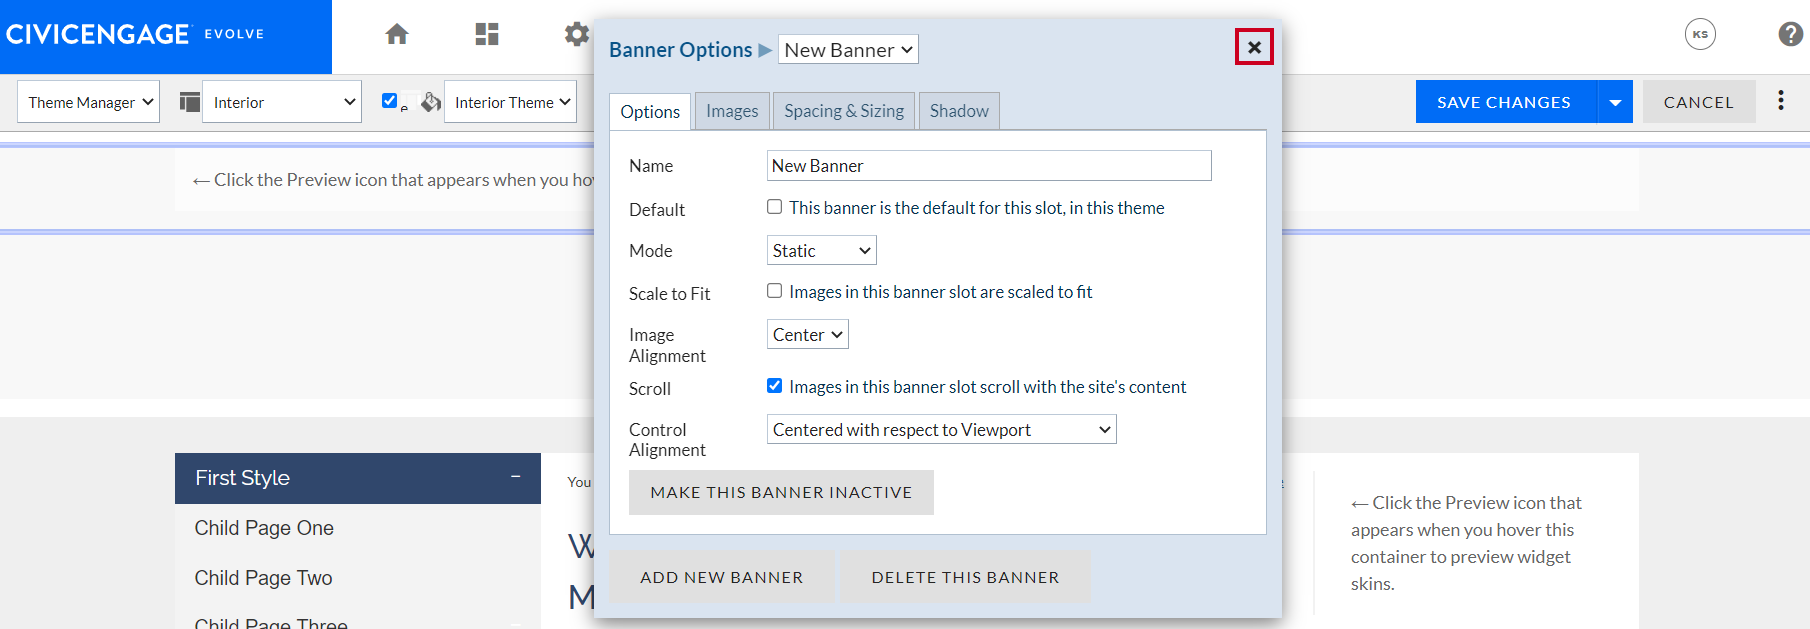 Close the Banner Options